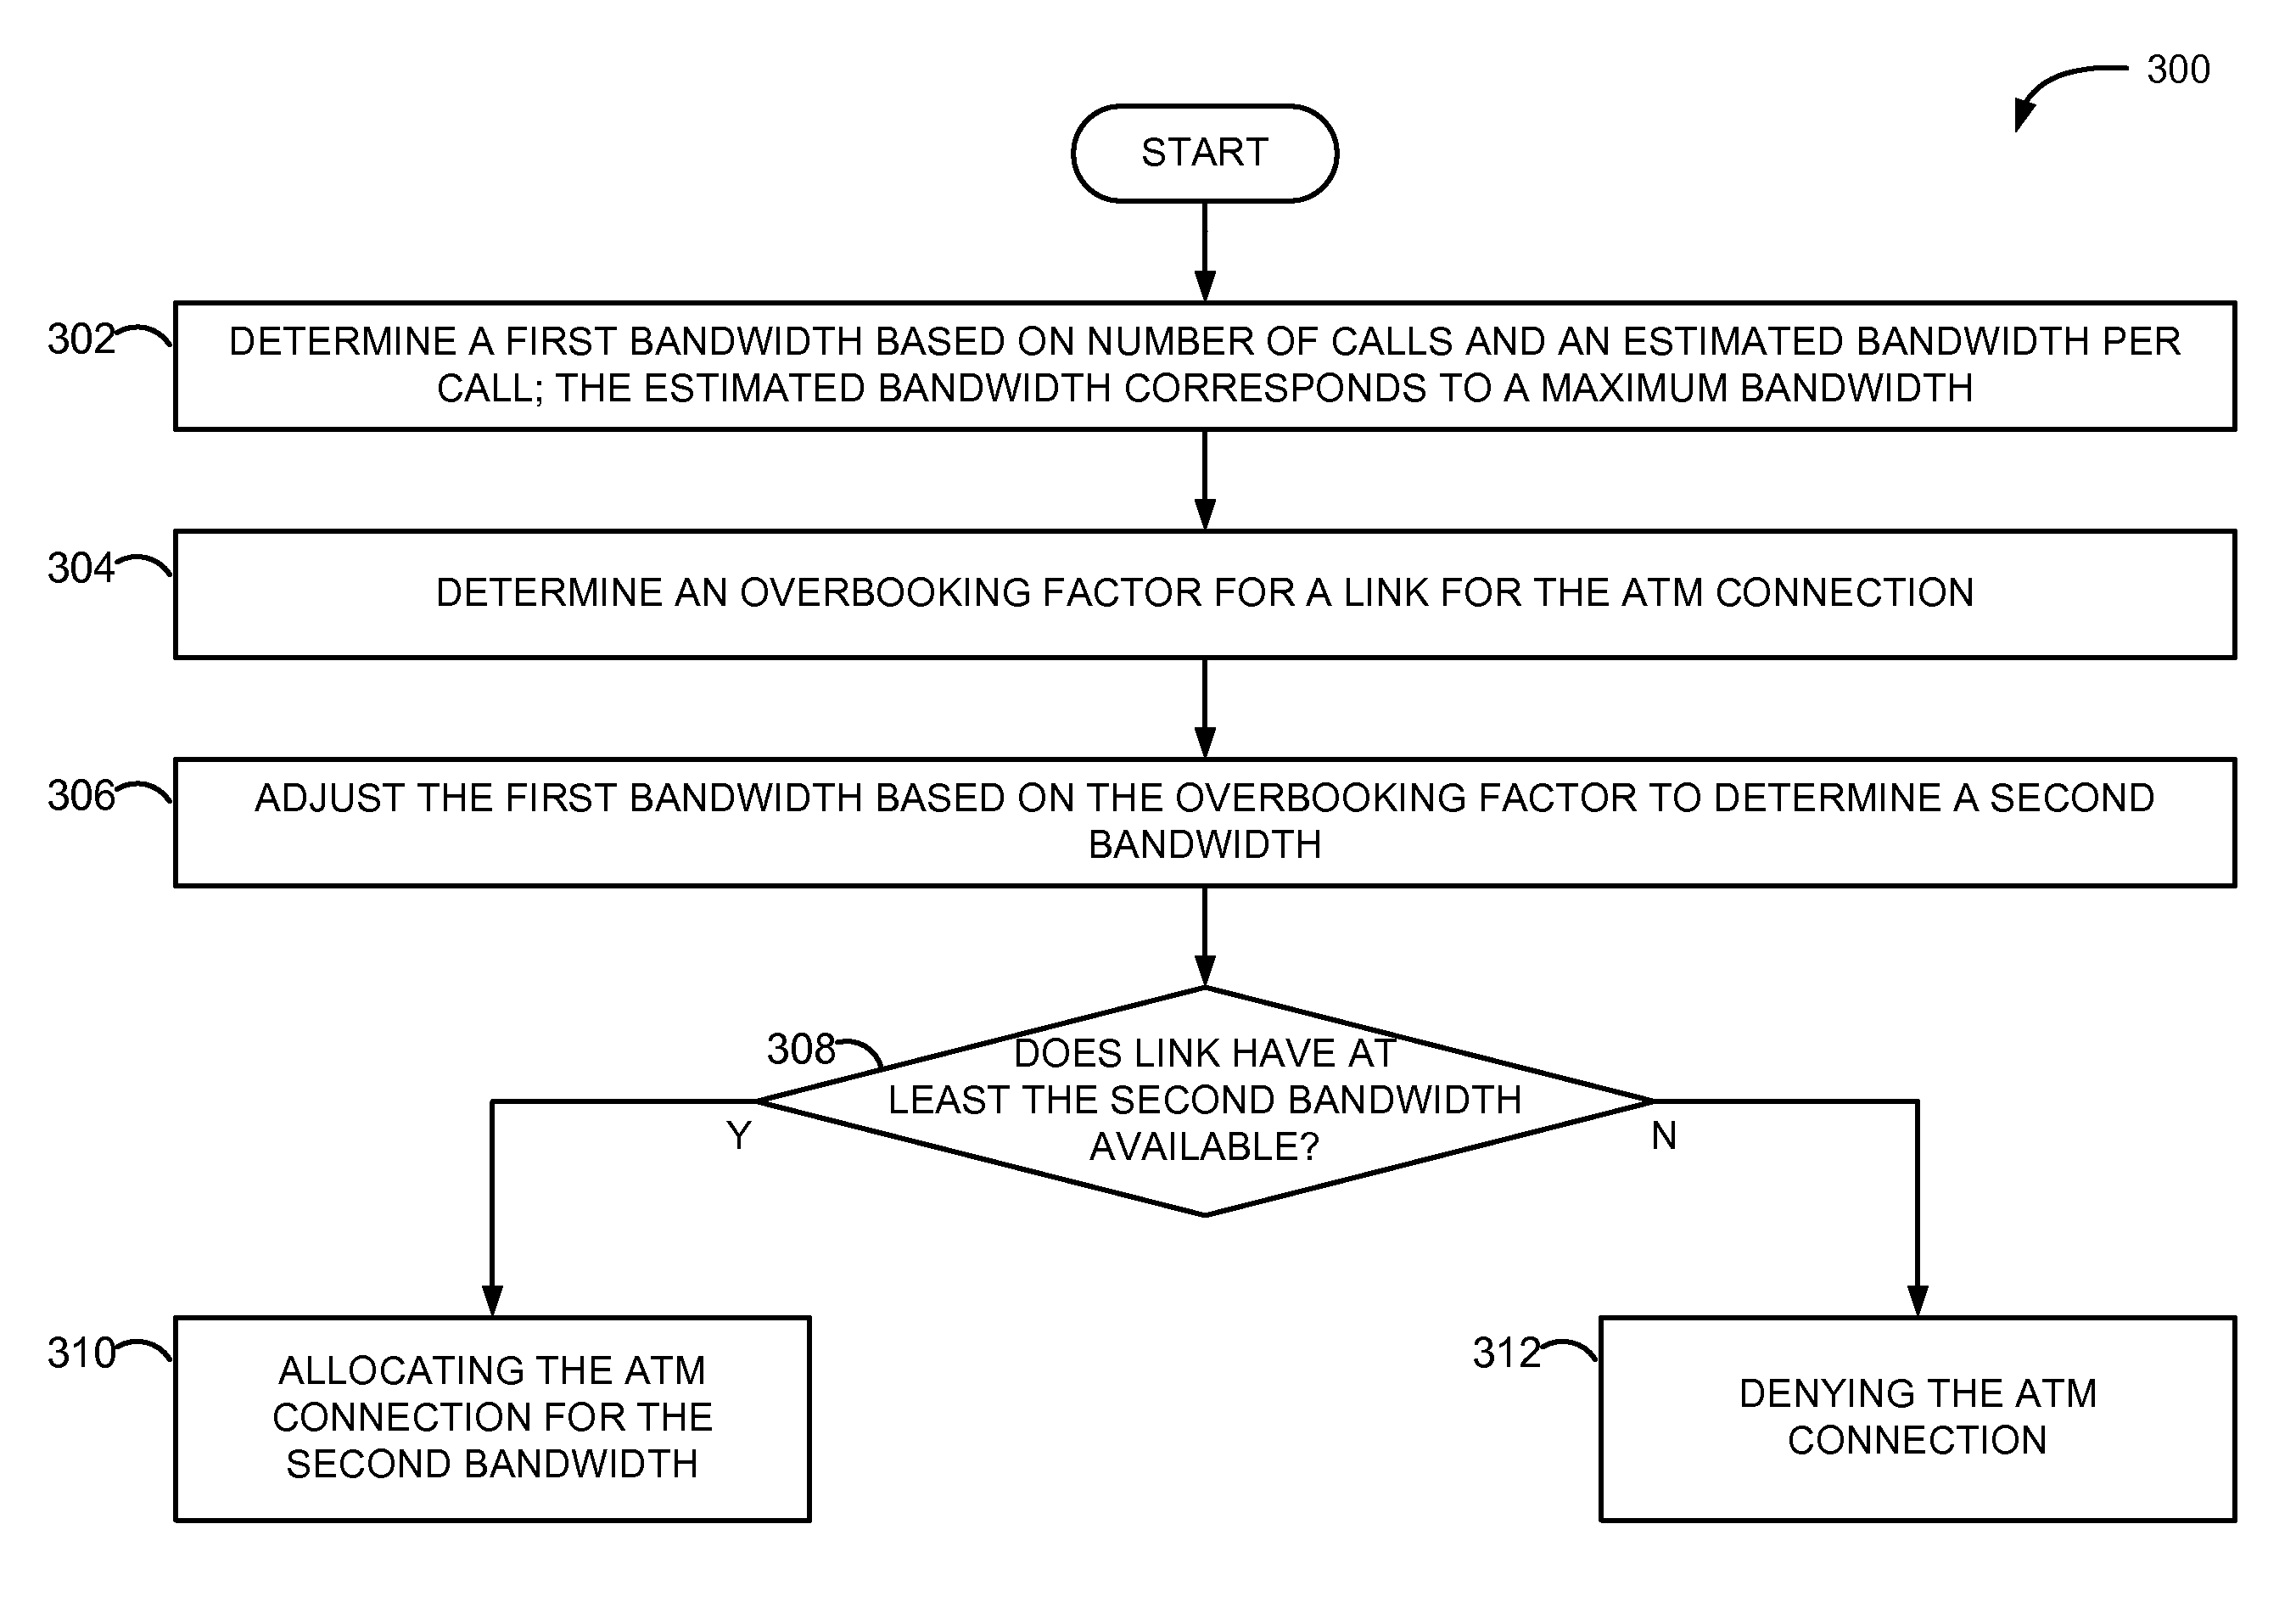 ATM connection allocation in ATM networks